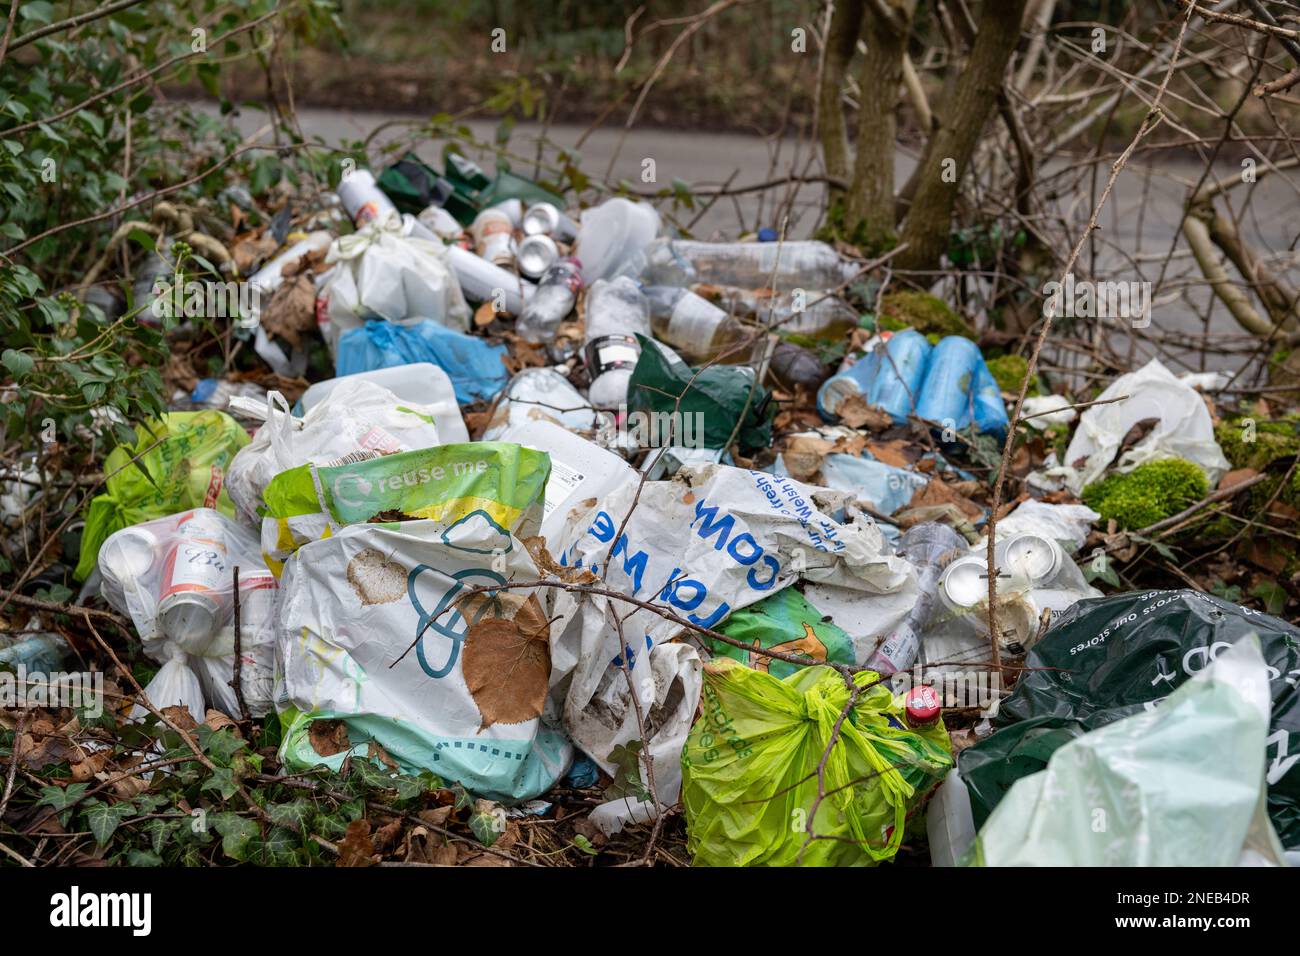 Litter thrown out in a woodland area in a layby on a roadside, Cumbria, UK. Stock Photo